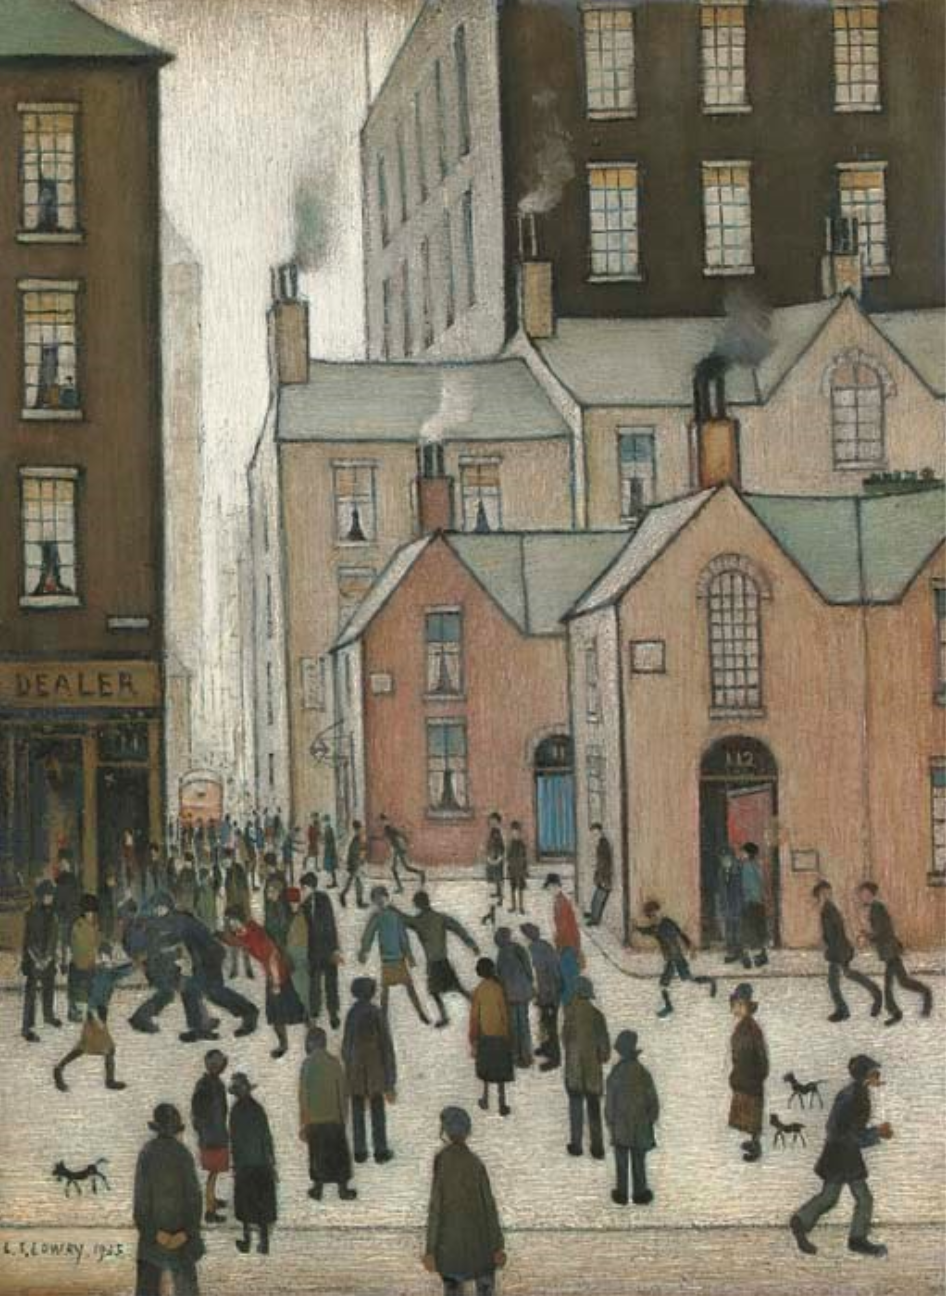 A Quarrel (1935) by Laurence Stephen Lowry (1887 - 1976), English artist.